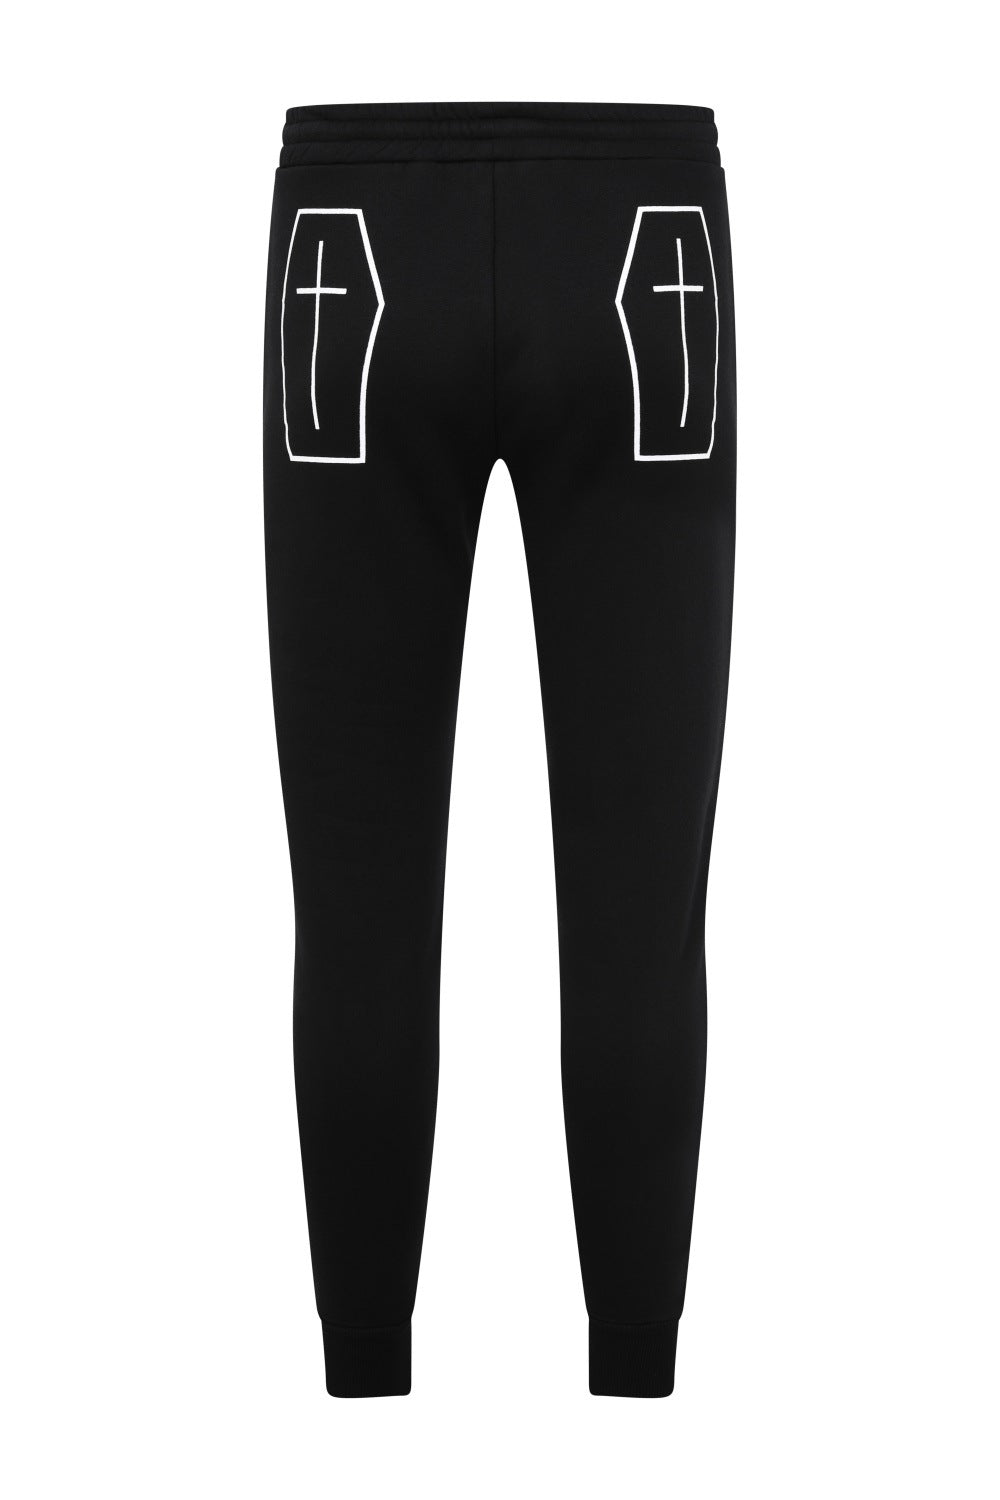 Banned Apparel Black Coffin Joggers